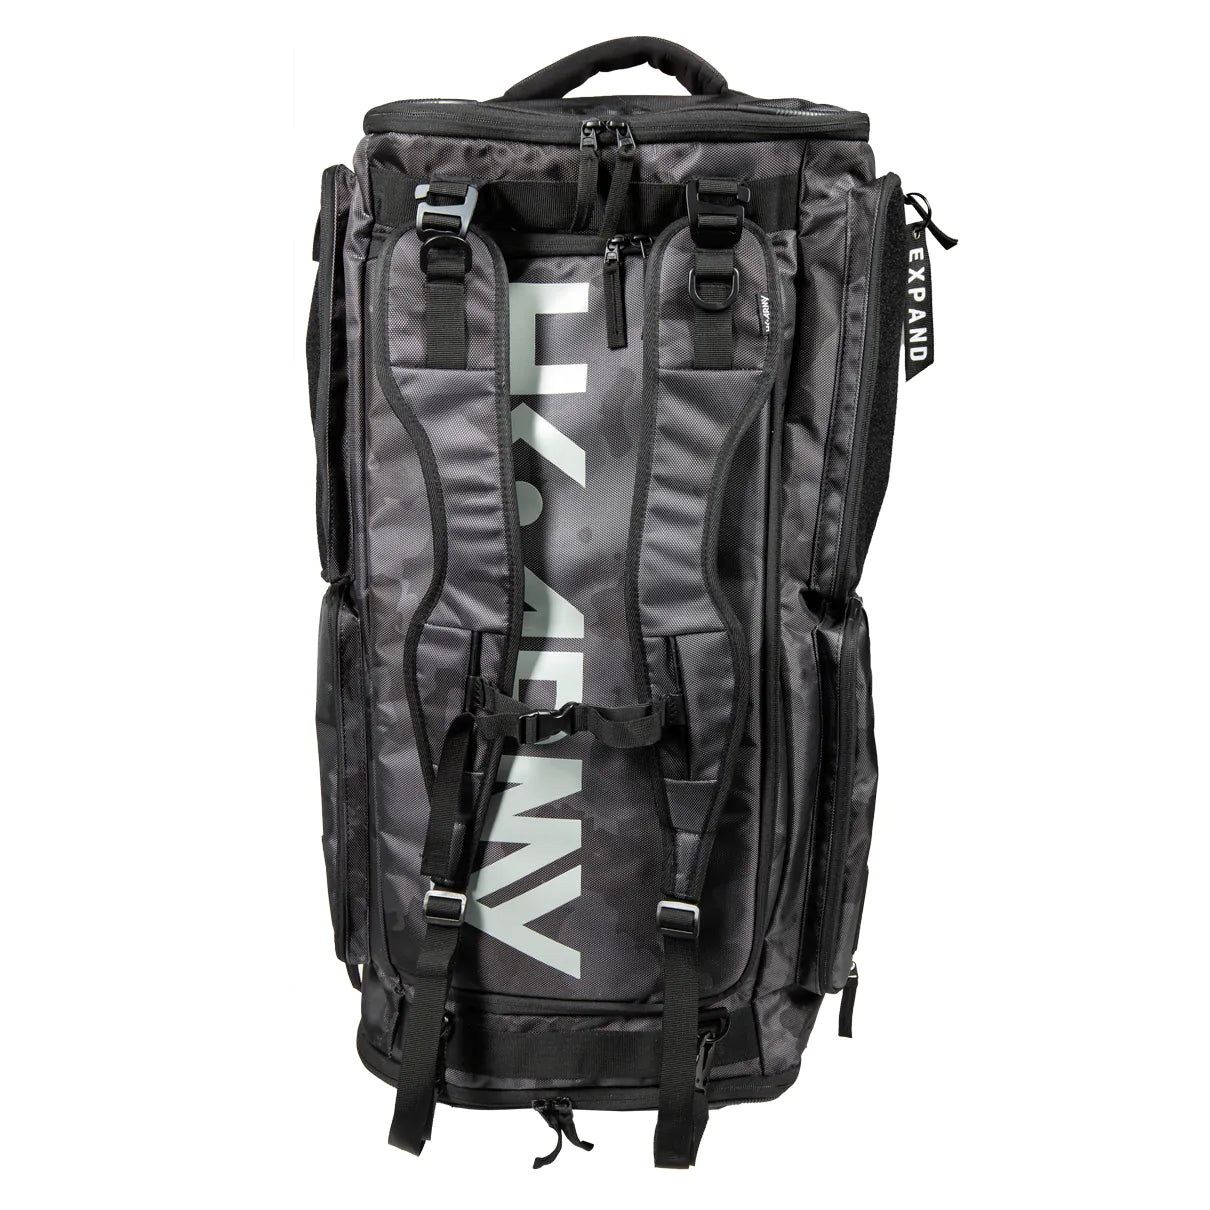 Expand 75L - Roller Gear Bag - Stealth | Paintball Gear Bag | Hk Army